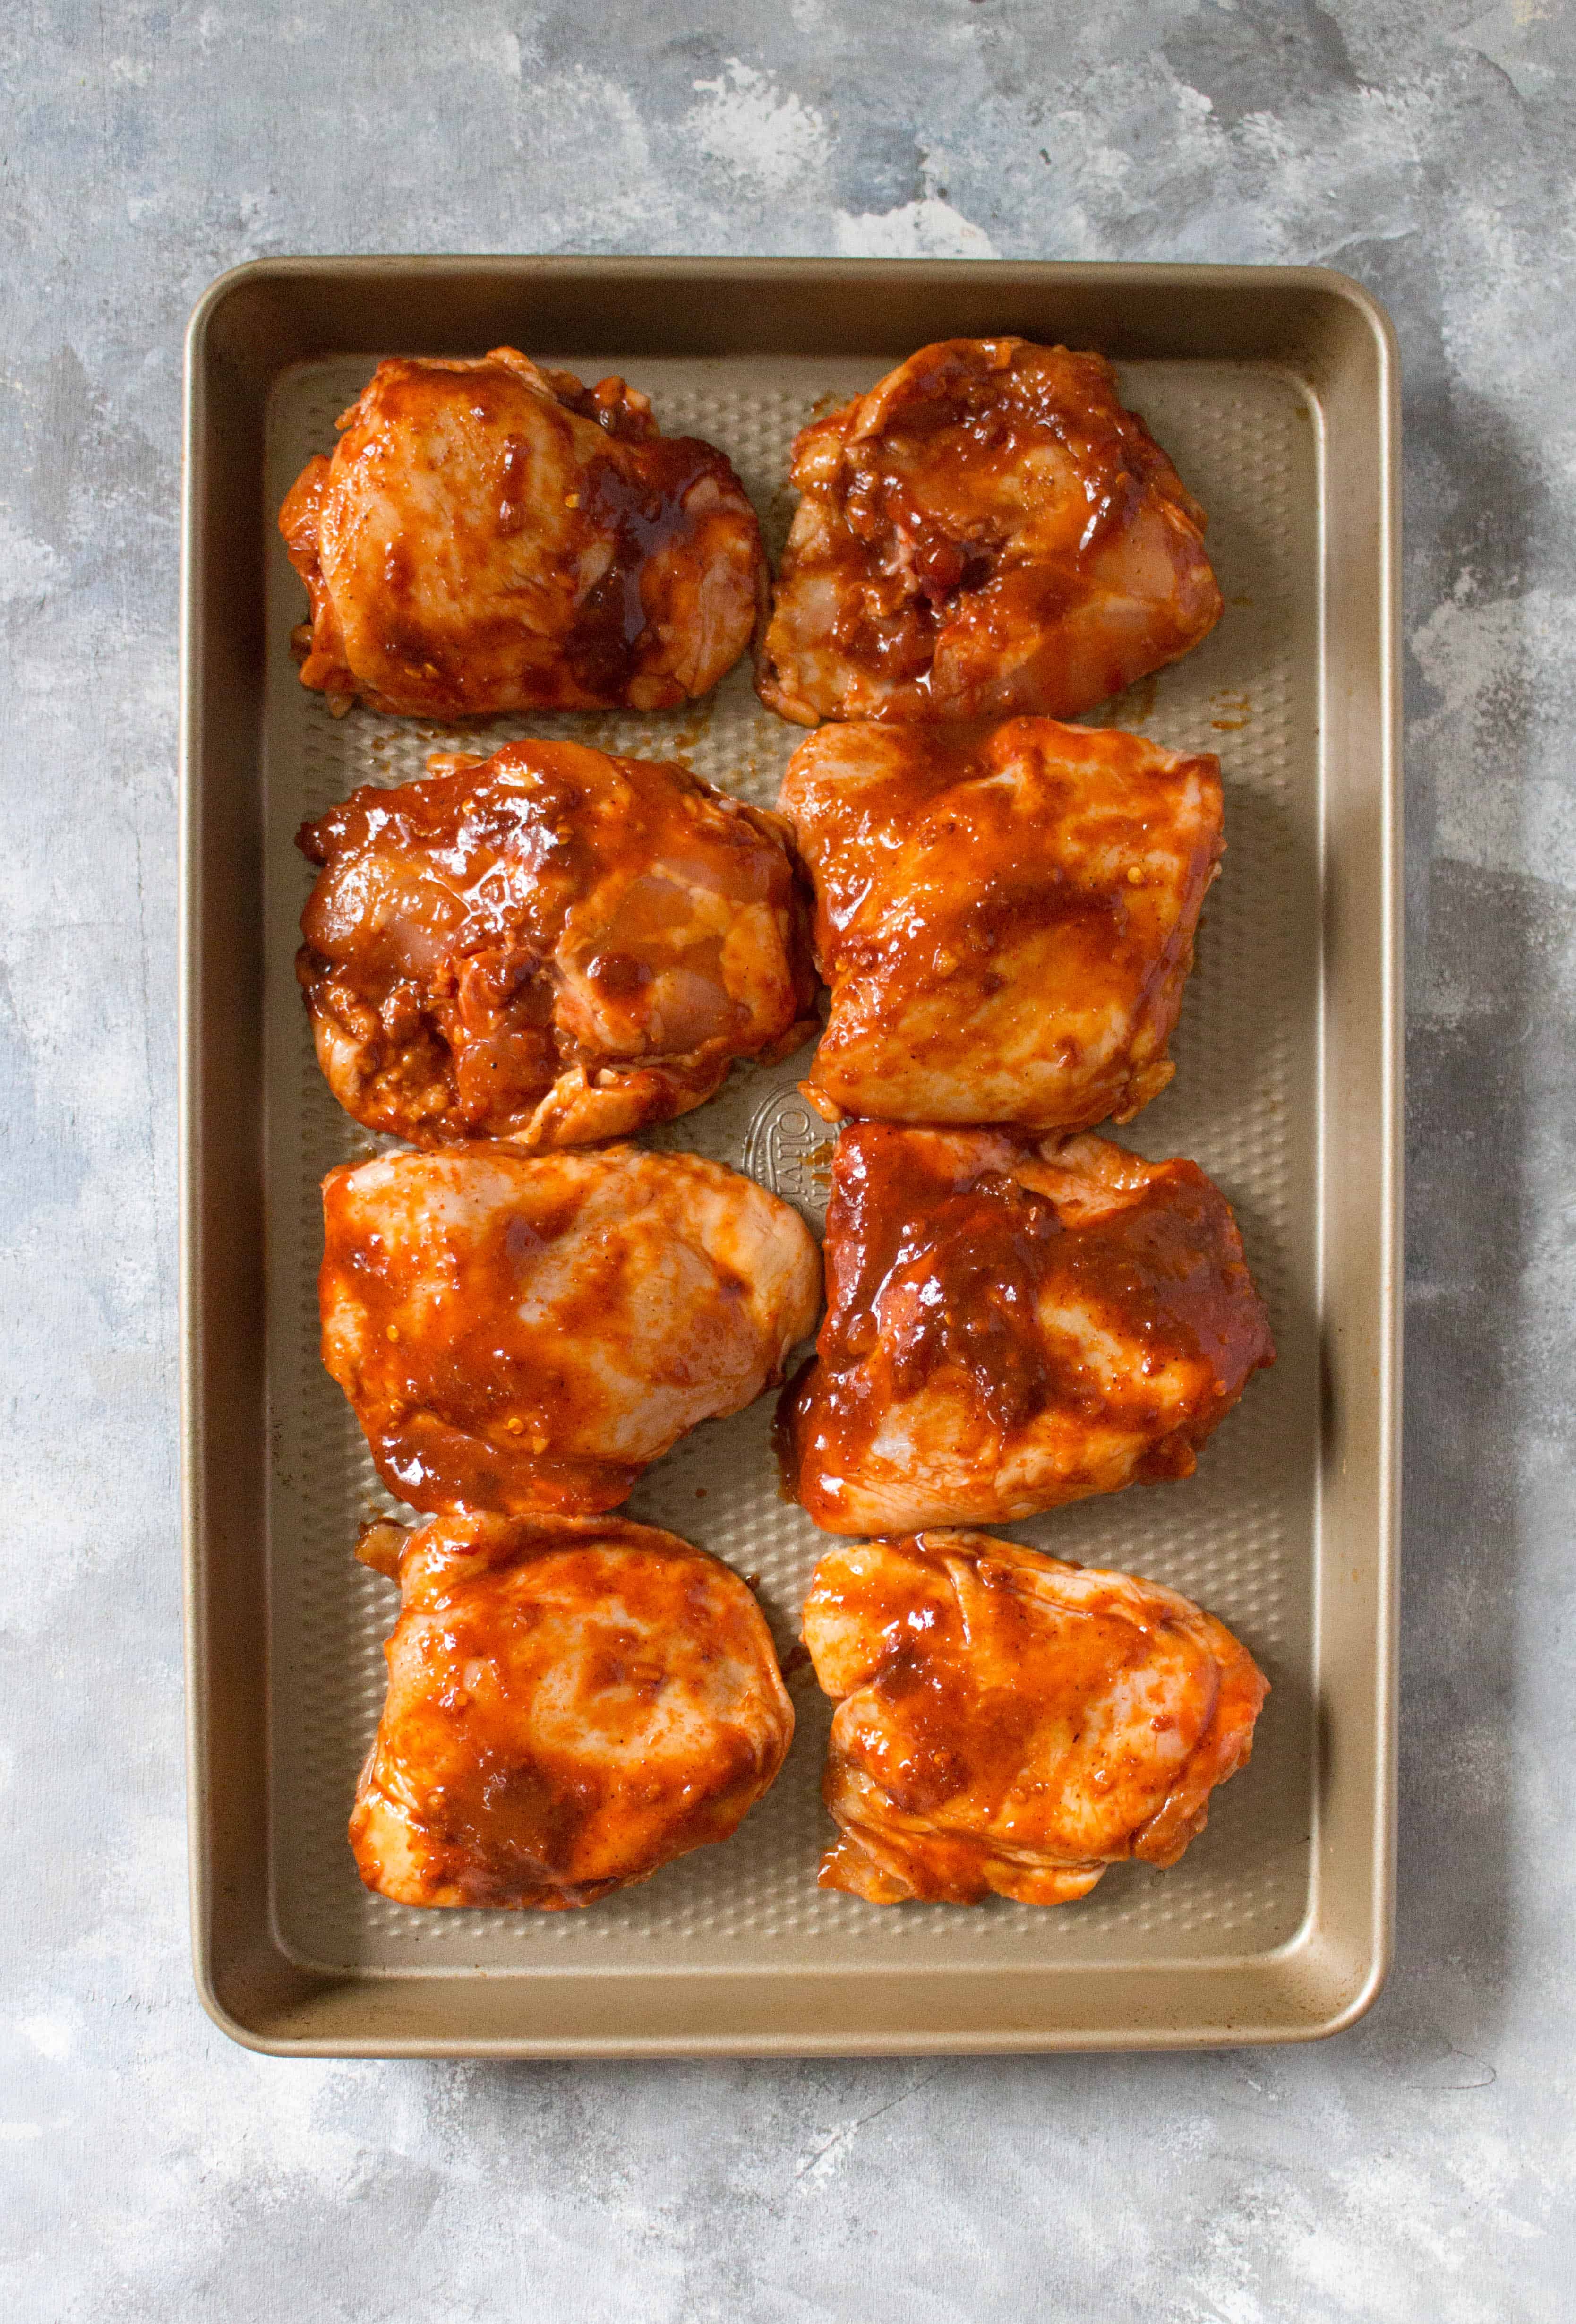 Looking for a lunch with a bit of a kick? This Spicy Korean Chicken Meal Prep is prefect for you! The chicken is oven baked so they're wonderfully juicy and tender on the inside while still being crispy on the outside!